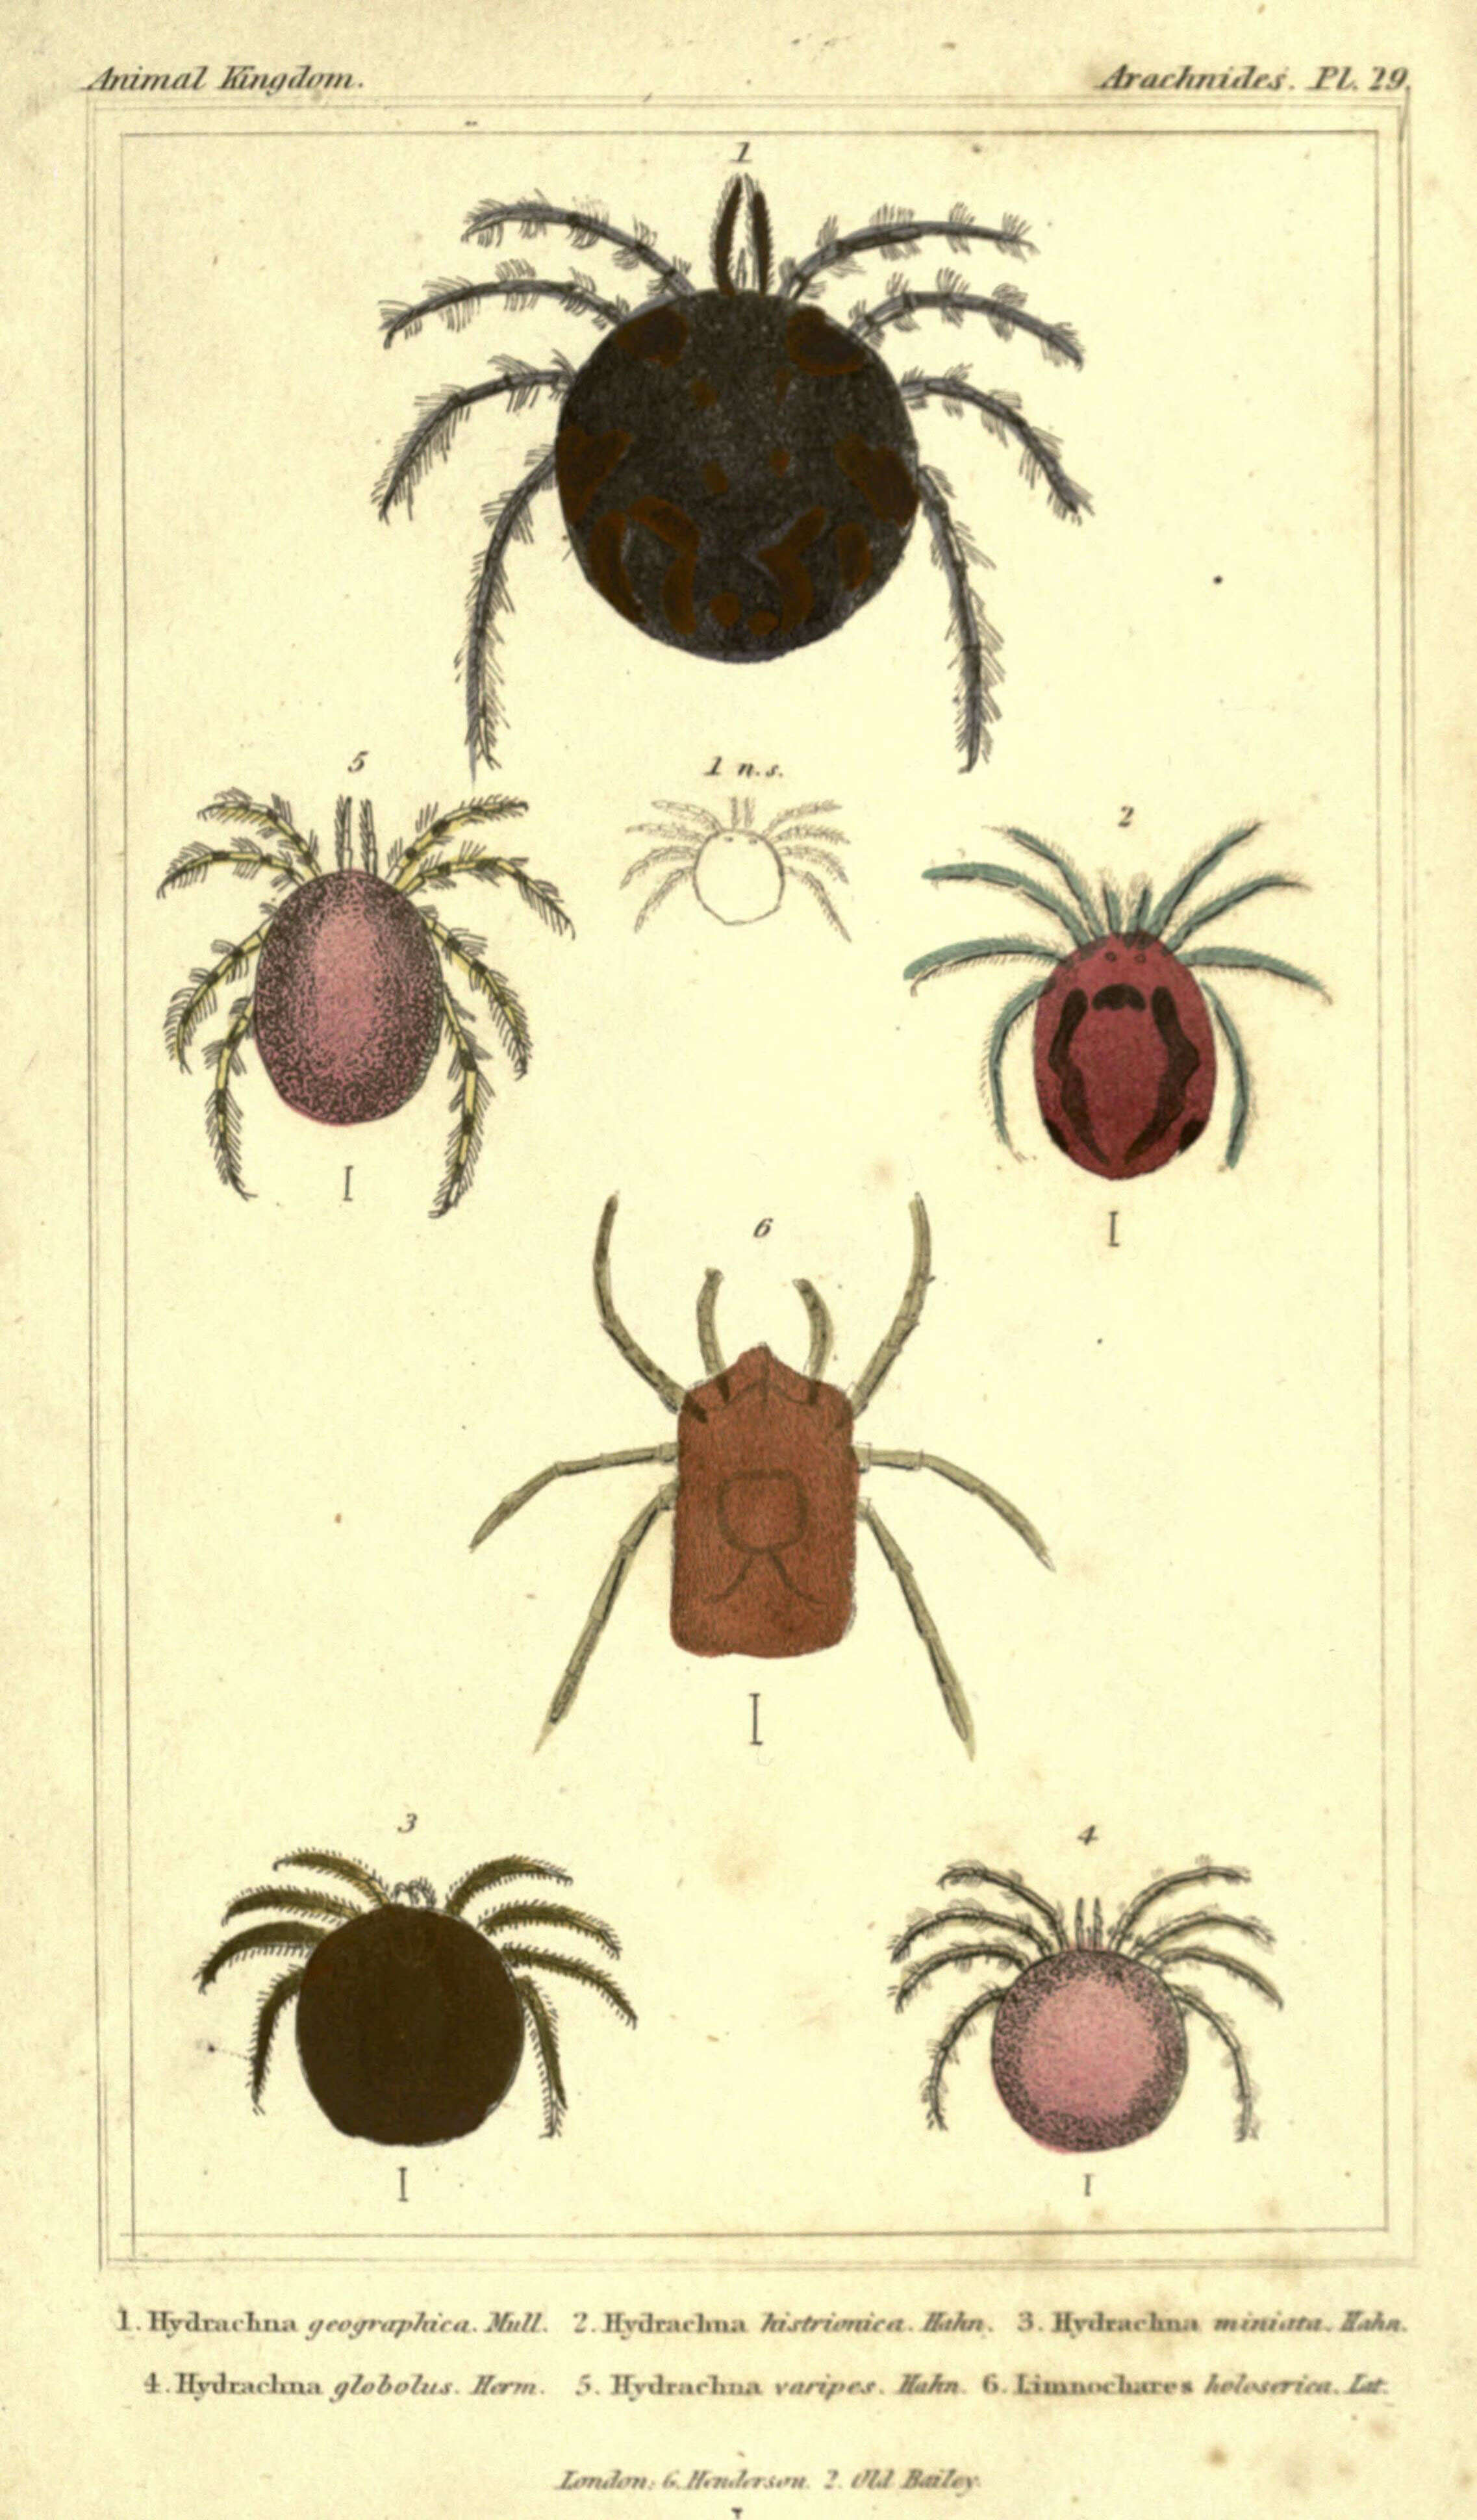 Image of Hydrachna geographica Muller